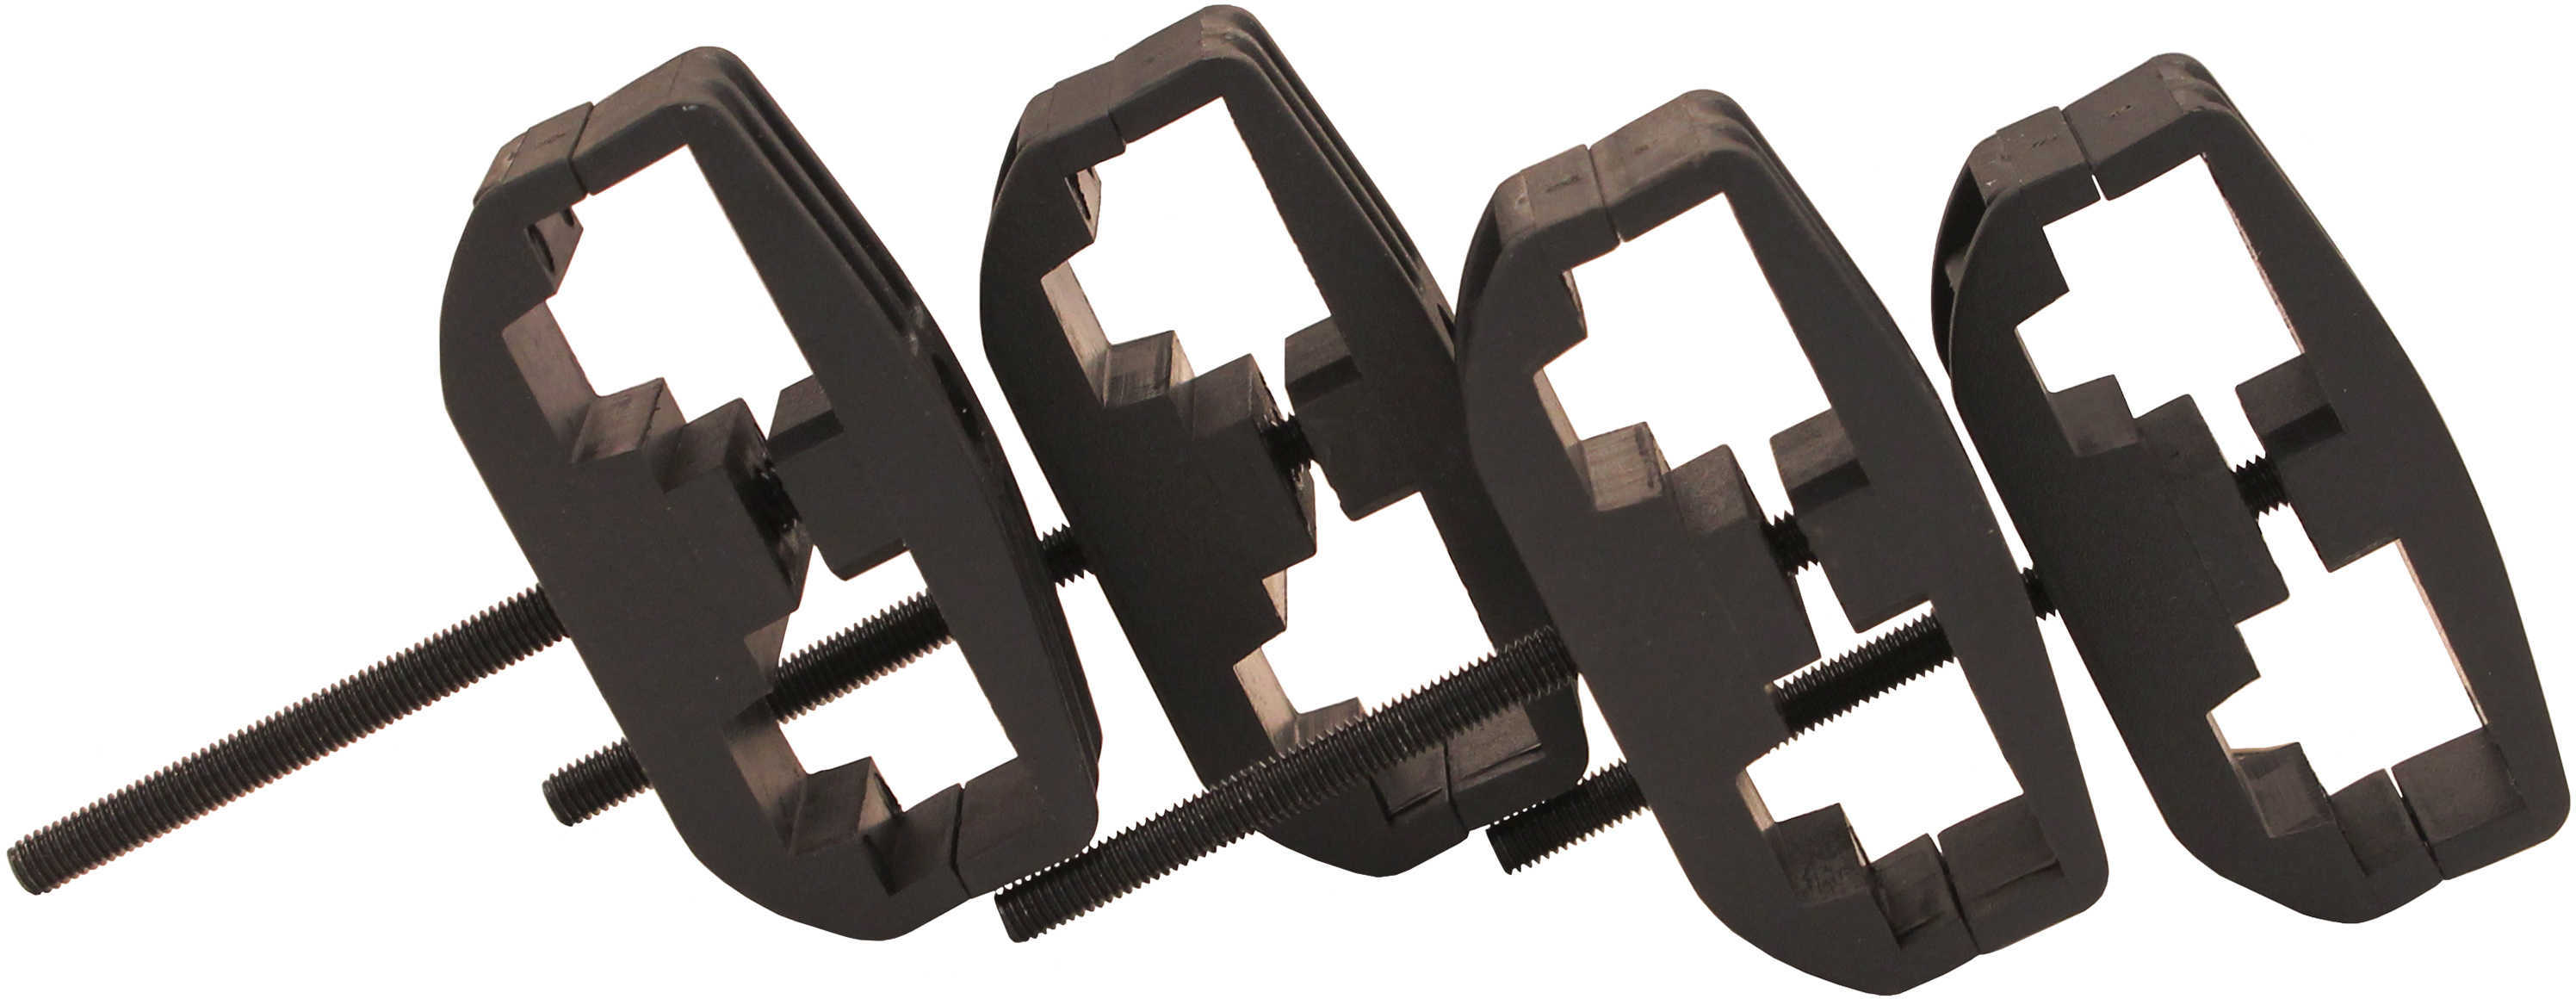 ProMag AR-15 Accessories Mag Clamp 4-Pack PM016B